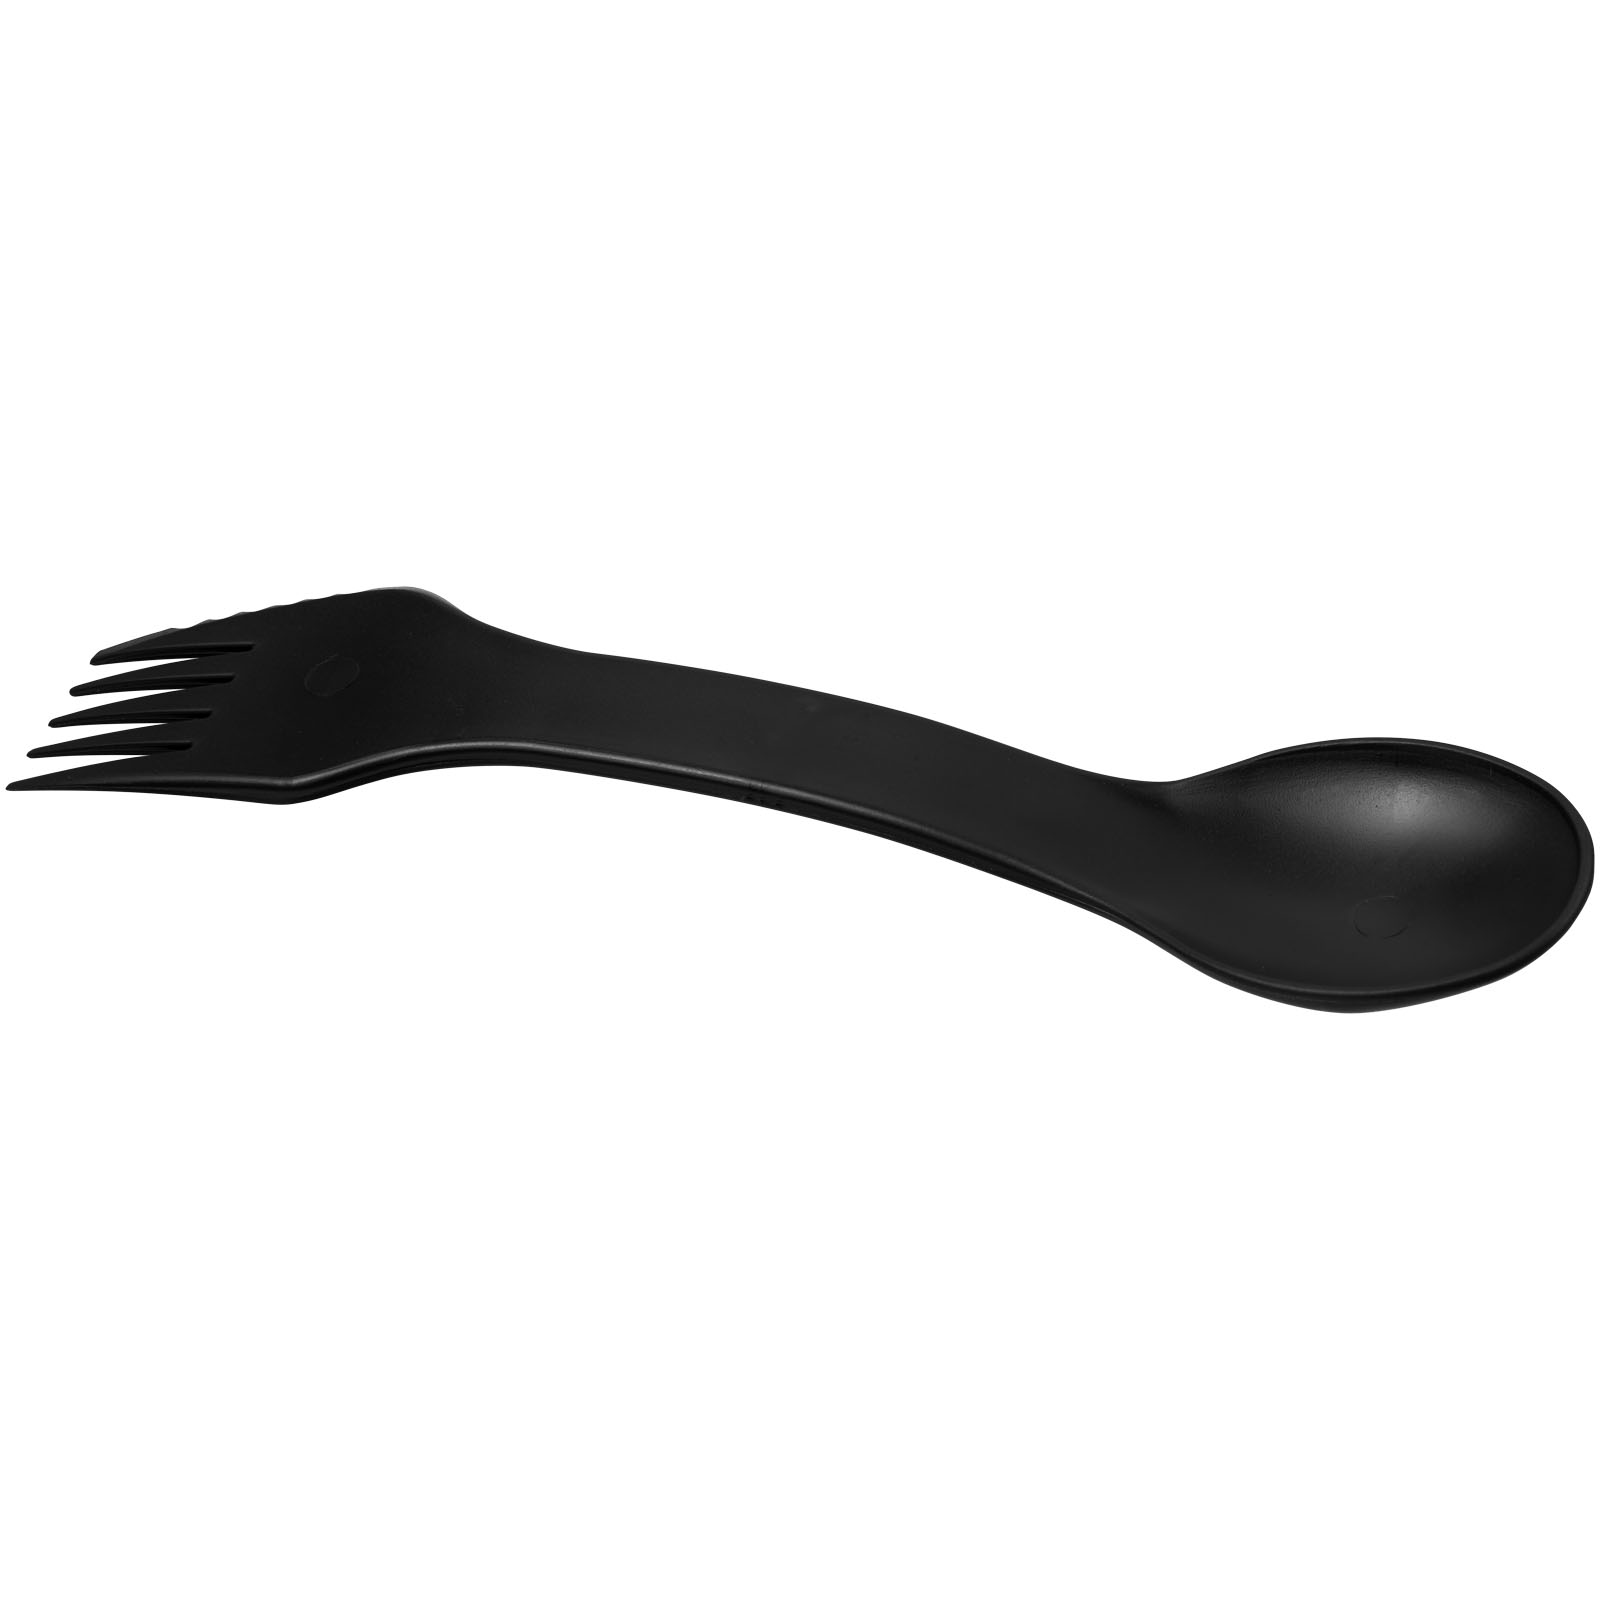 Home & Kitchen - Epsy 3-in-1 spoon, fork, and knife